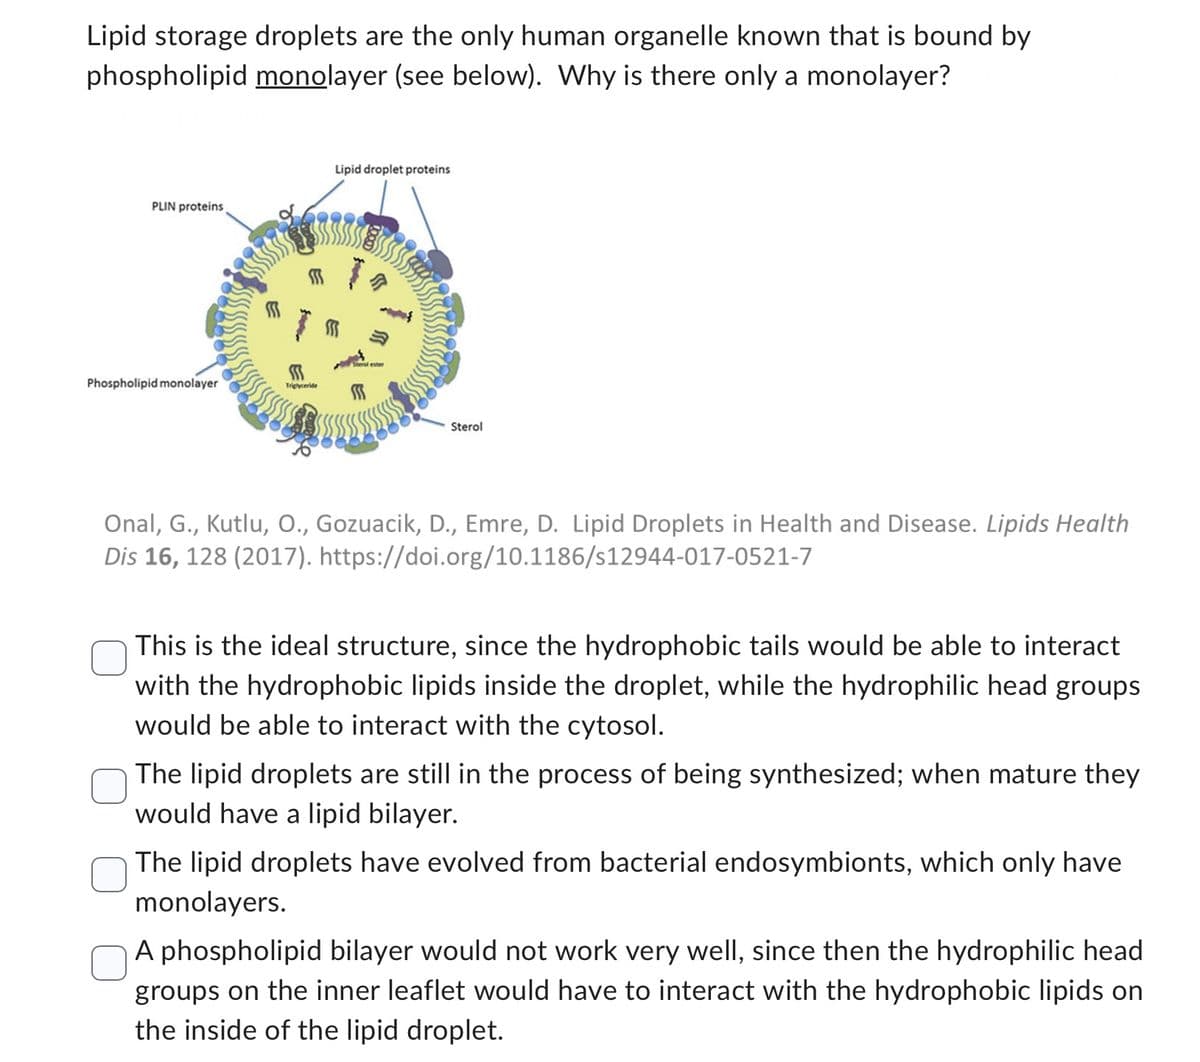 Lipid storage droplets are the only human organelle known that is bound by
phospholipid monolayer (see below). Why is there only a monolayer?
PLIN proteins,
Phospholipid monolayer
SSS
SSS
Triglyceride
Lipid droplet proteins
E
»
Sterol ester
Sterol
Onal, G., Kutlu, O., Gozuacik, D., Emre, D. Lipid Droplets in Health and Disease. Lipids Health
Dis 16, 128 (2017). https://doi.org/10.1186/s12944-017-0521-7
This is the ideal structure, since the hydrophobic tails would be able to interact
with the hydrophobic lipids inside the droplet, while the hydrophilic head groups.
would be able to interact with the cytosol.
The lipid droplets are still in the process of being synthesized; when mature they
would have a lipid bilayer.
The lipid droplets have evolved from bacterial endosymbionts, which only have
monolayers.
A phospholipid bilayer would not work very well, since then the hydrophilic head
groups on the inner leaflet would have to interact with the hydrophobic lipids on
the inside of the lipid droplet.